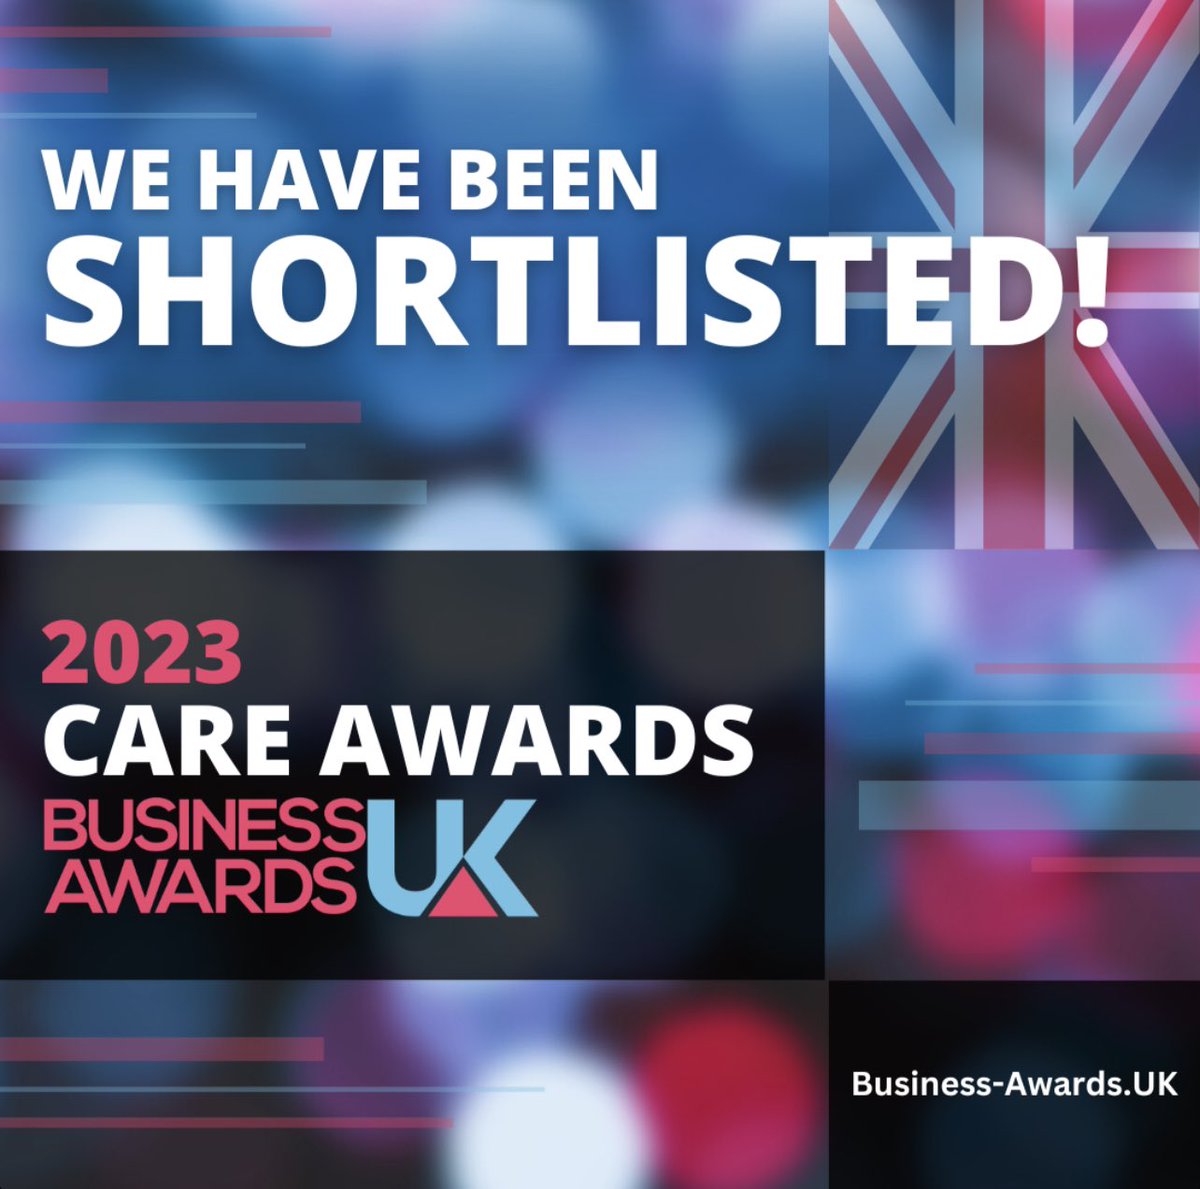 Very excited to announce that we have been recognised and shortlisted for the 2023 Care Awards 🎉

A much deserved recognition for all the hard work we put into care compliance and management. Well done team! 🥳

#nursingagencyuk #trustedstaff #cqccompliance